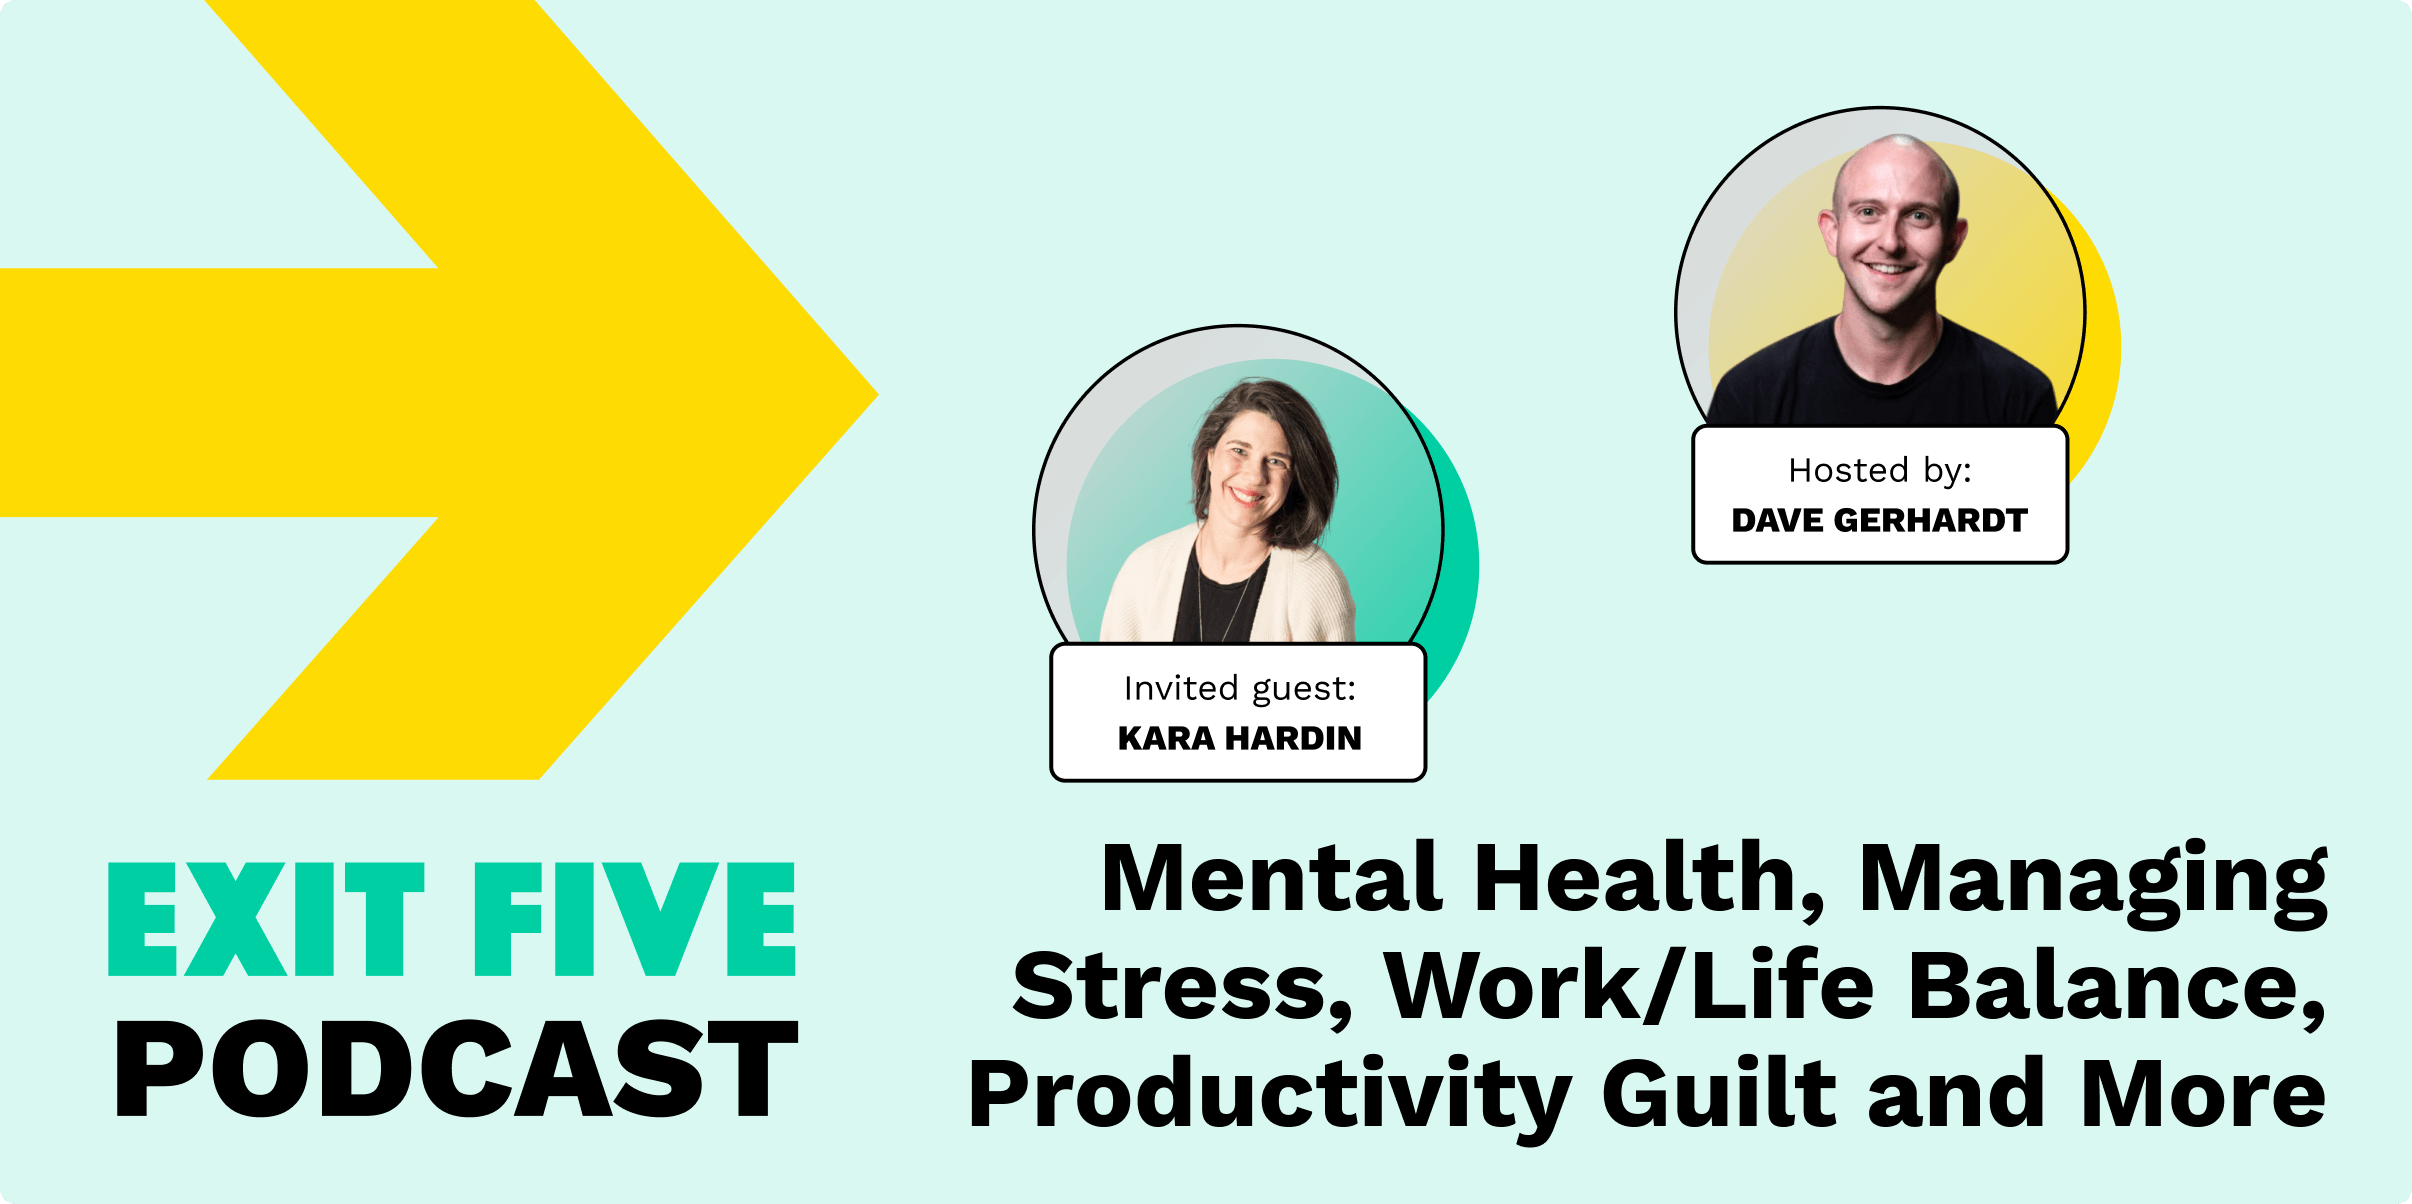 Mental Health, Managing Stress, Work/Life Balance, Productivity Guilt and more